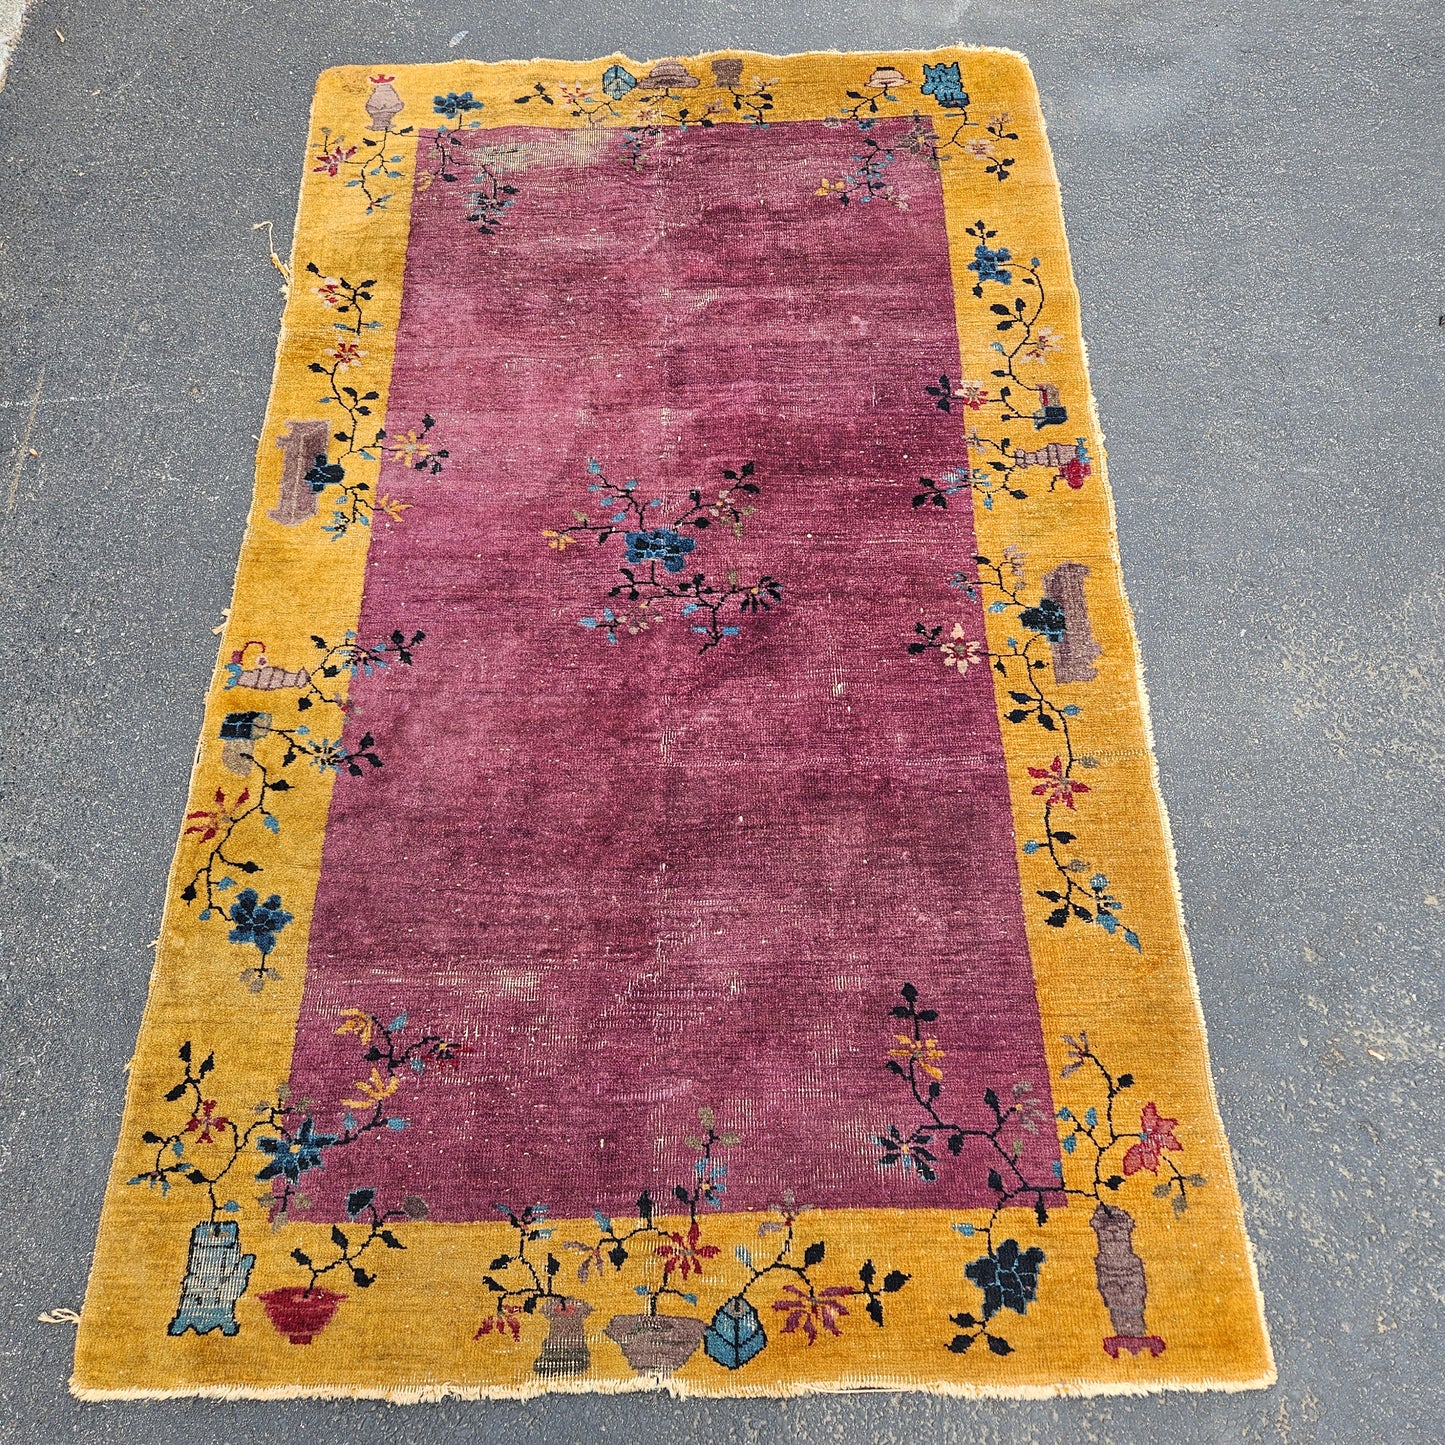 Vintage Chinese Hand Knotted Rug / Carpet 4' x 6' 8"